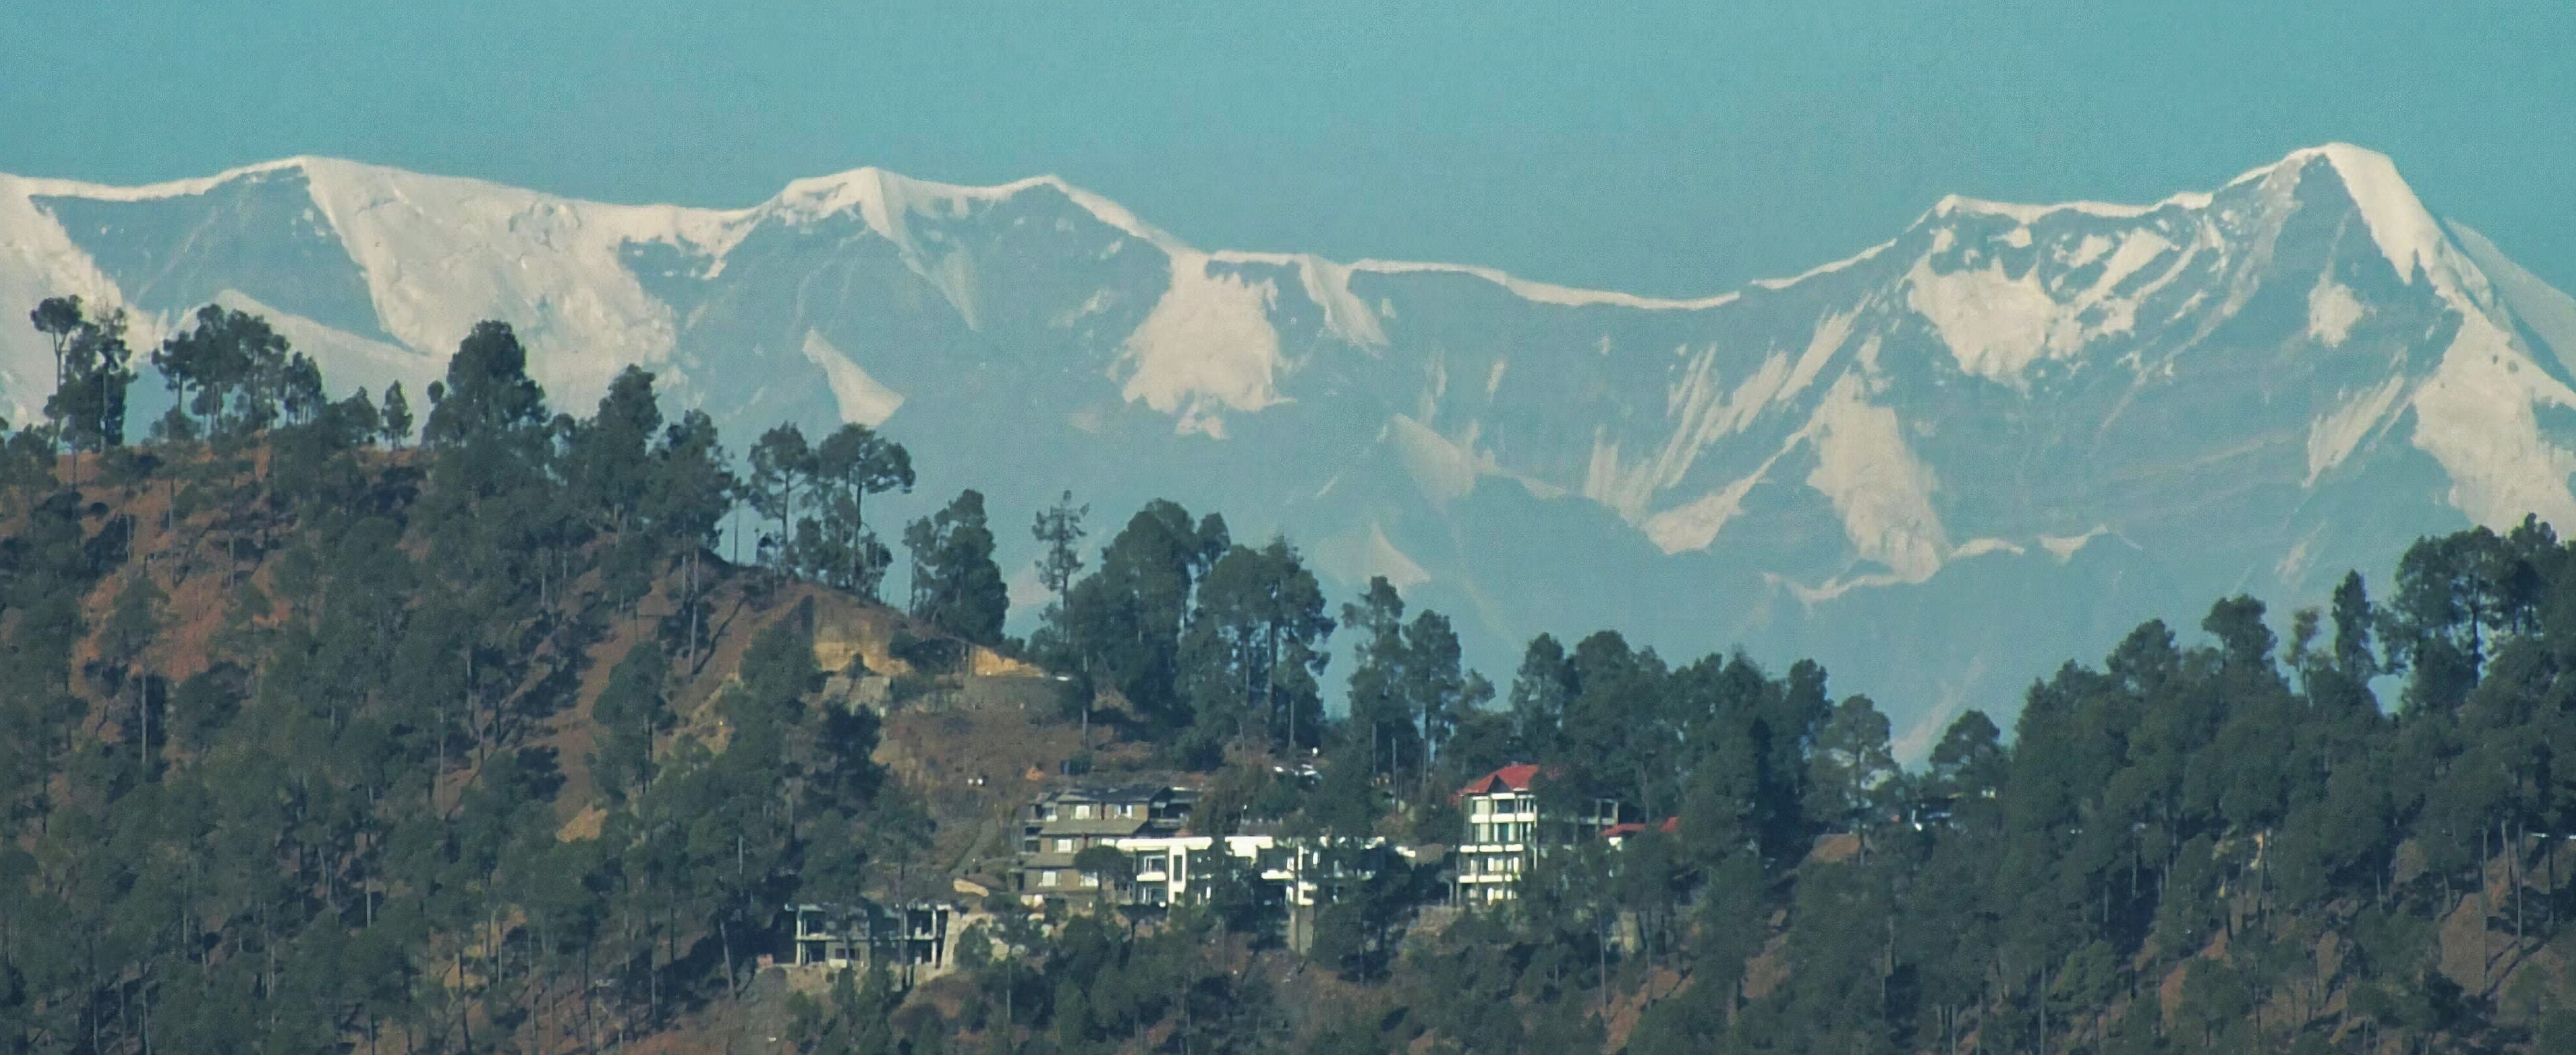 View of the Himalayas from my home